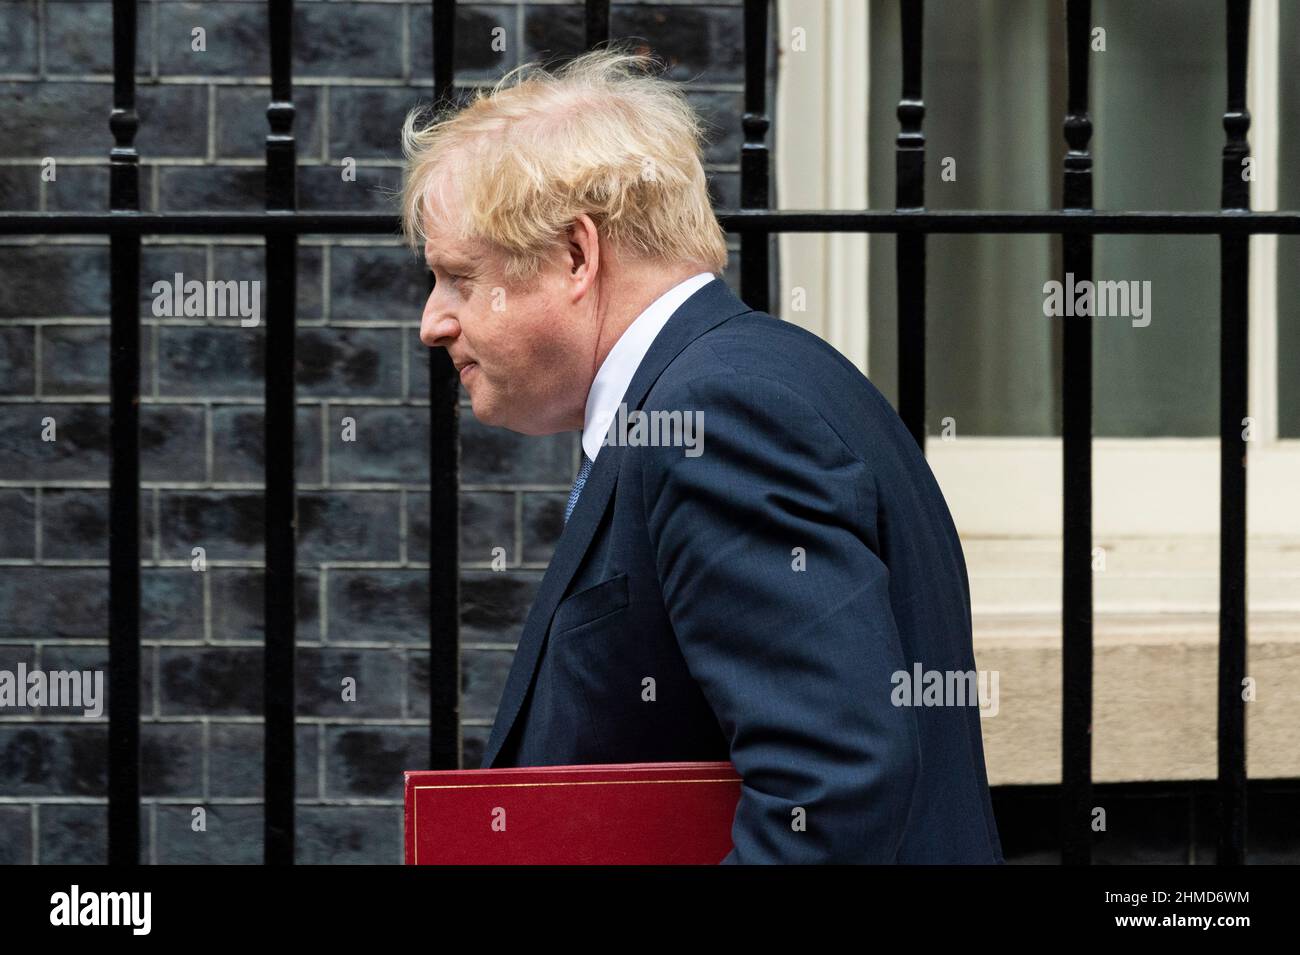 London, UK.  9 February 2022.  Boris Johnson, Prime Minister, leaves 10 Downing Street for Prime Minister’s Questions (PMQs) at the House of Commons.  The Prime Minister is under pressure from MPs to apologise for, or withdraw, comments made to Labour leader Kier Starmer in last week’s PMQs related to the Jimmy Saville case.  Credit: Stephen Chung/Alamy Live News Stock Photo